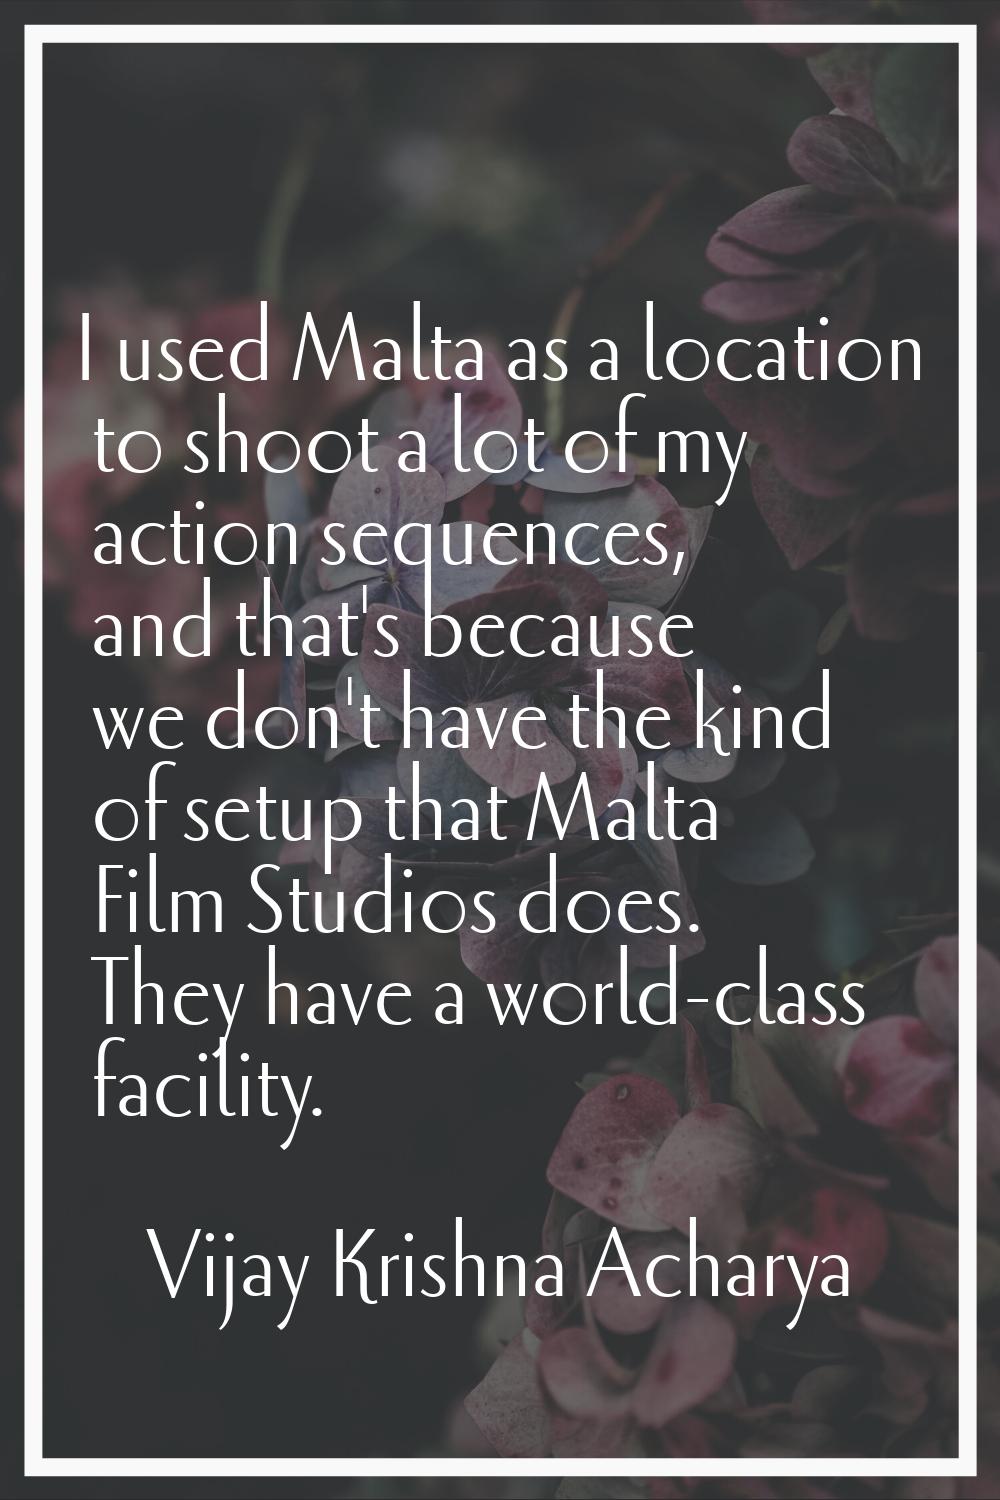 I used Malta as a location to shoot a lot of my action sequences, and that's because we don't have 